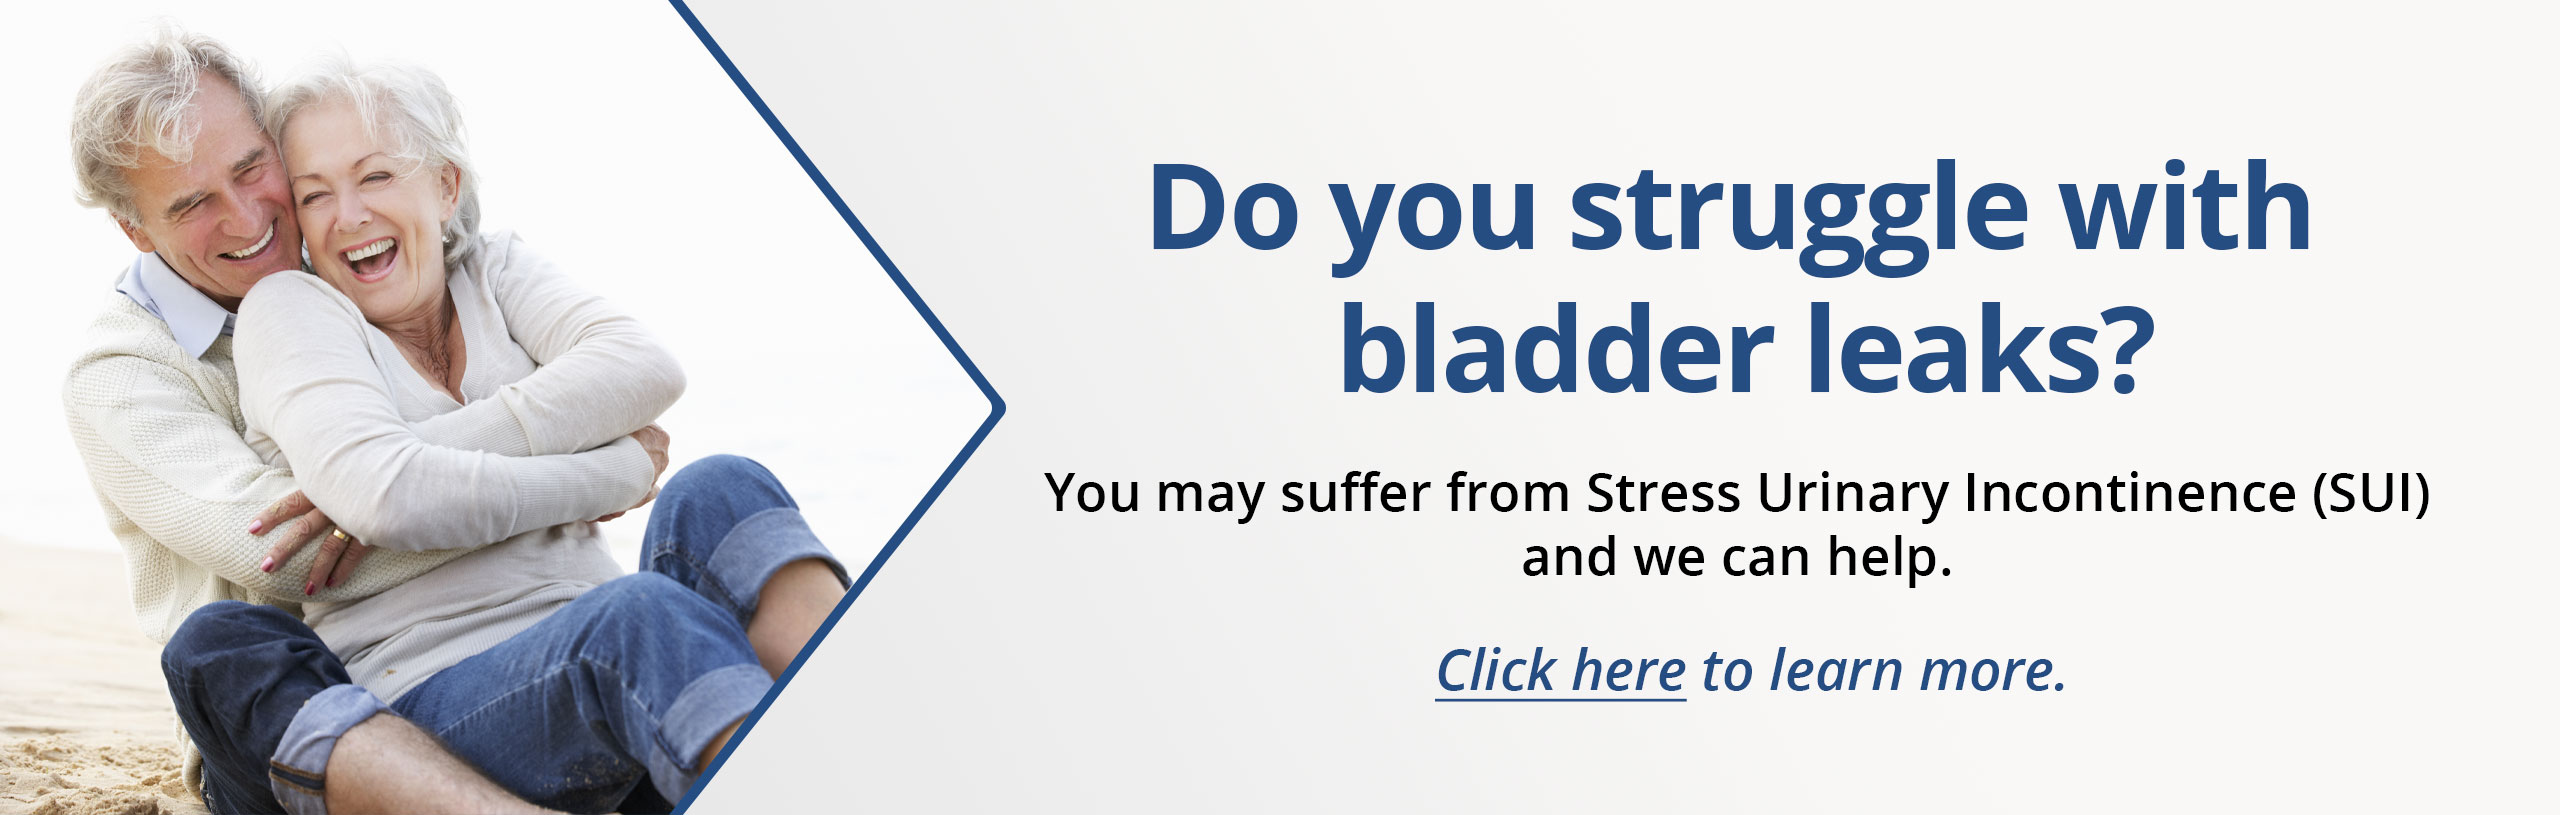 Do you struggle with bladder leaks?
You may suffer from Stress Urinary Incontinence (SUI) and we can help. Click Here to learn more.